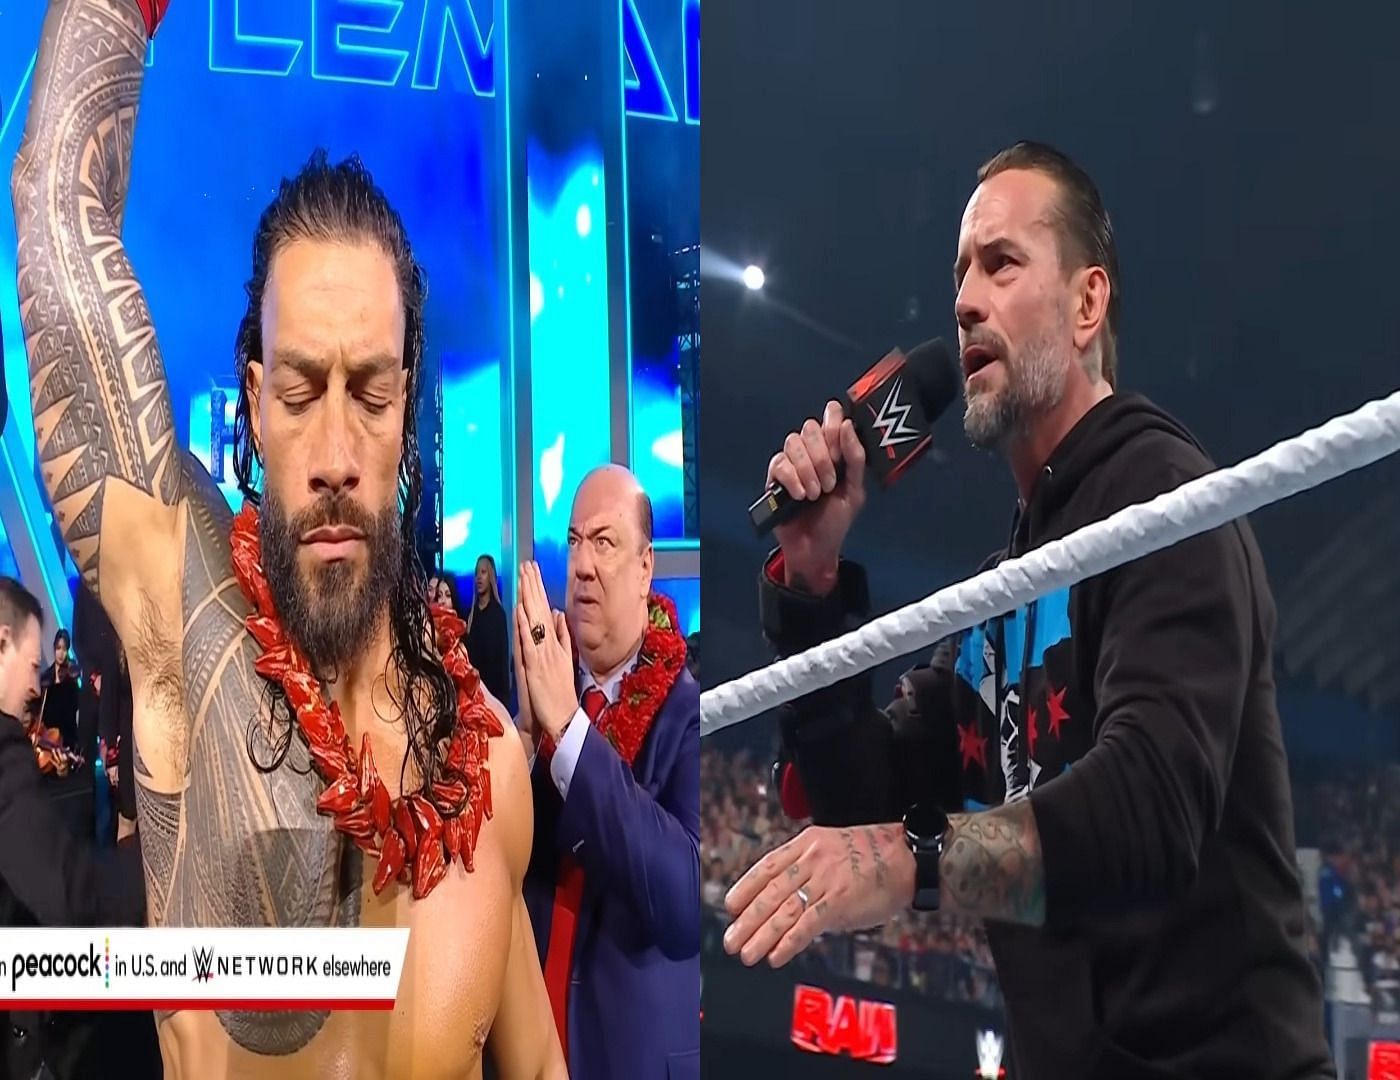 Roman Reigns and CM Punk { Image Source: Screenshot from WWE